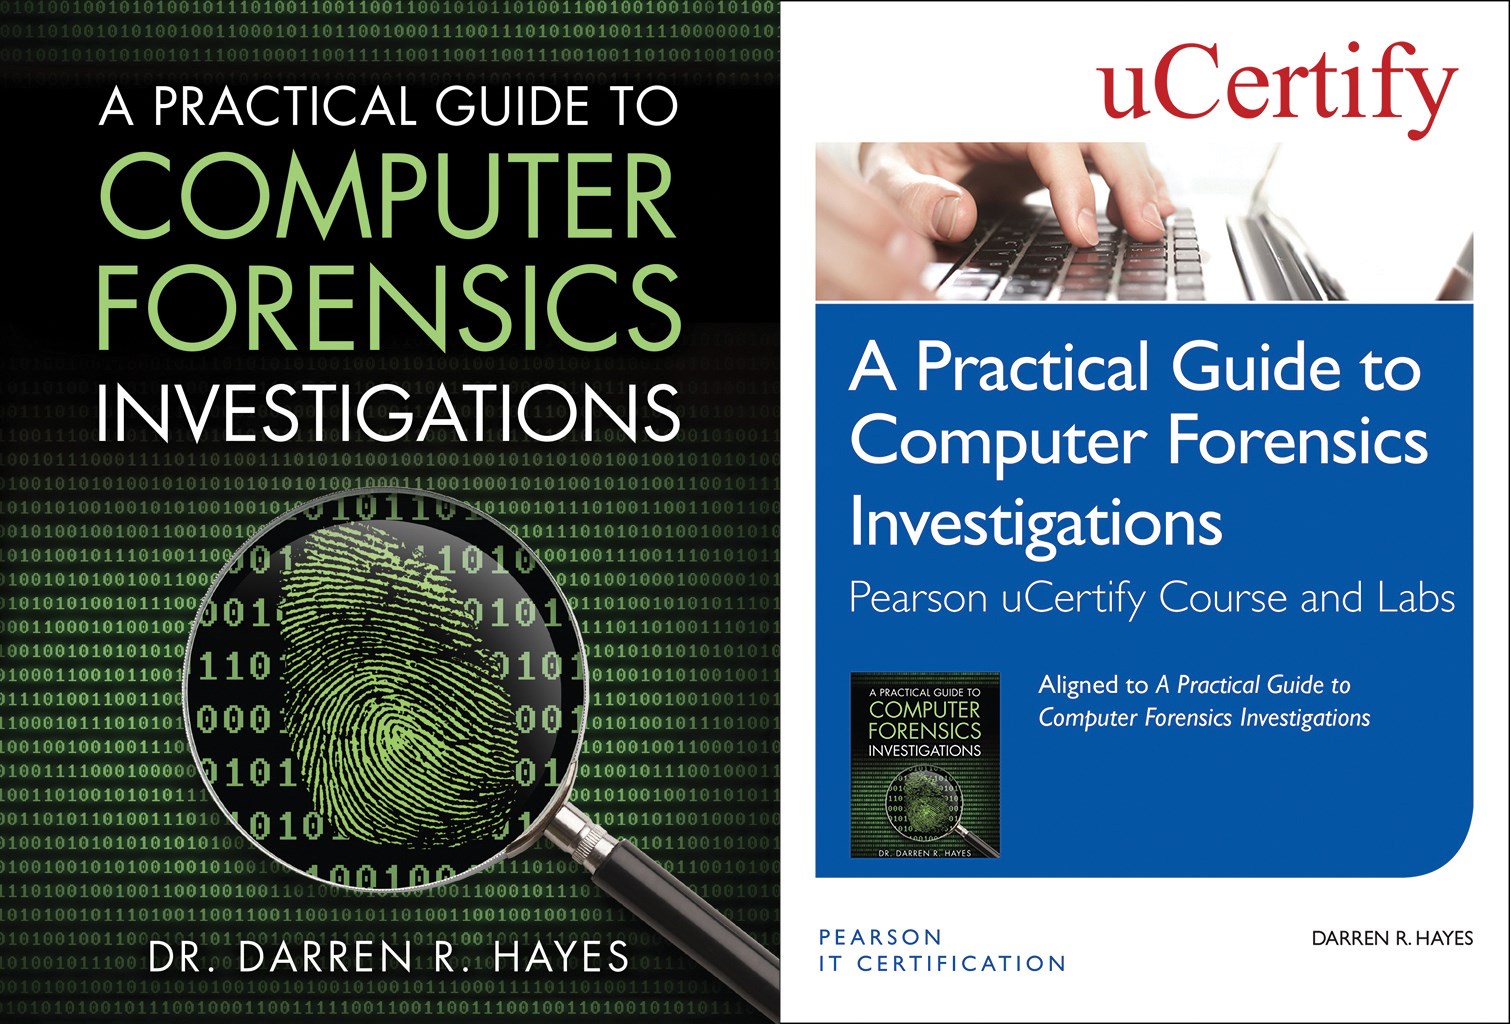 a-practical-guide-to-computer-forensics-investigations-pearson-ucertify-course-and-labs-and